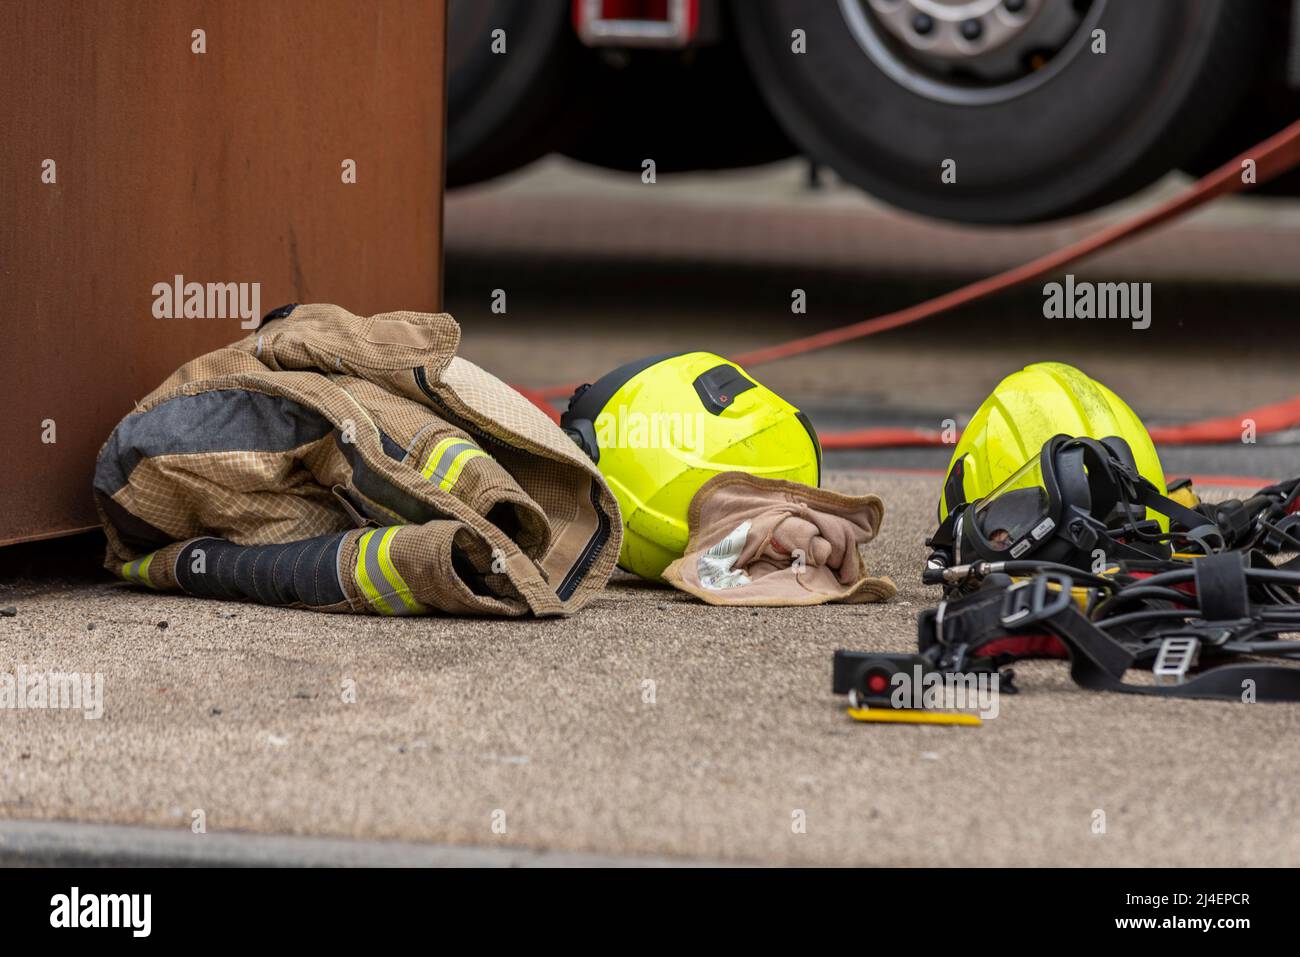 Essex County Fire & Rescue Service carrying out training exercise at University of Essex student accommodation in Southend. Discarded equipment after Stock Photo